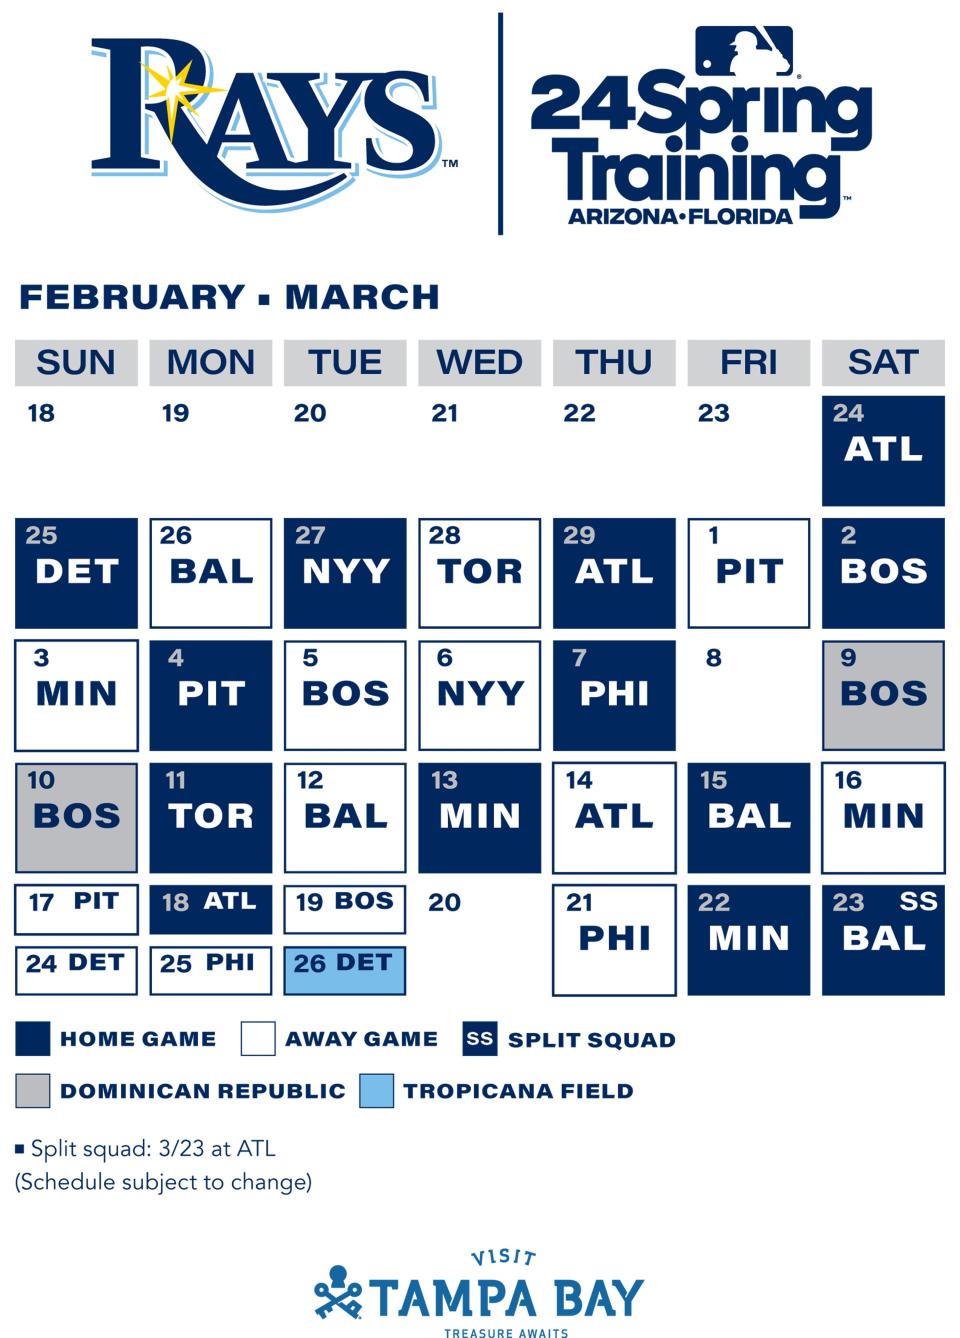 Tampa Bay Rays spring training schedule